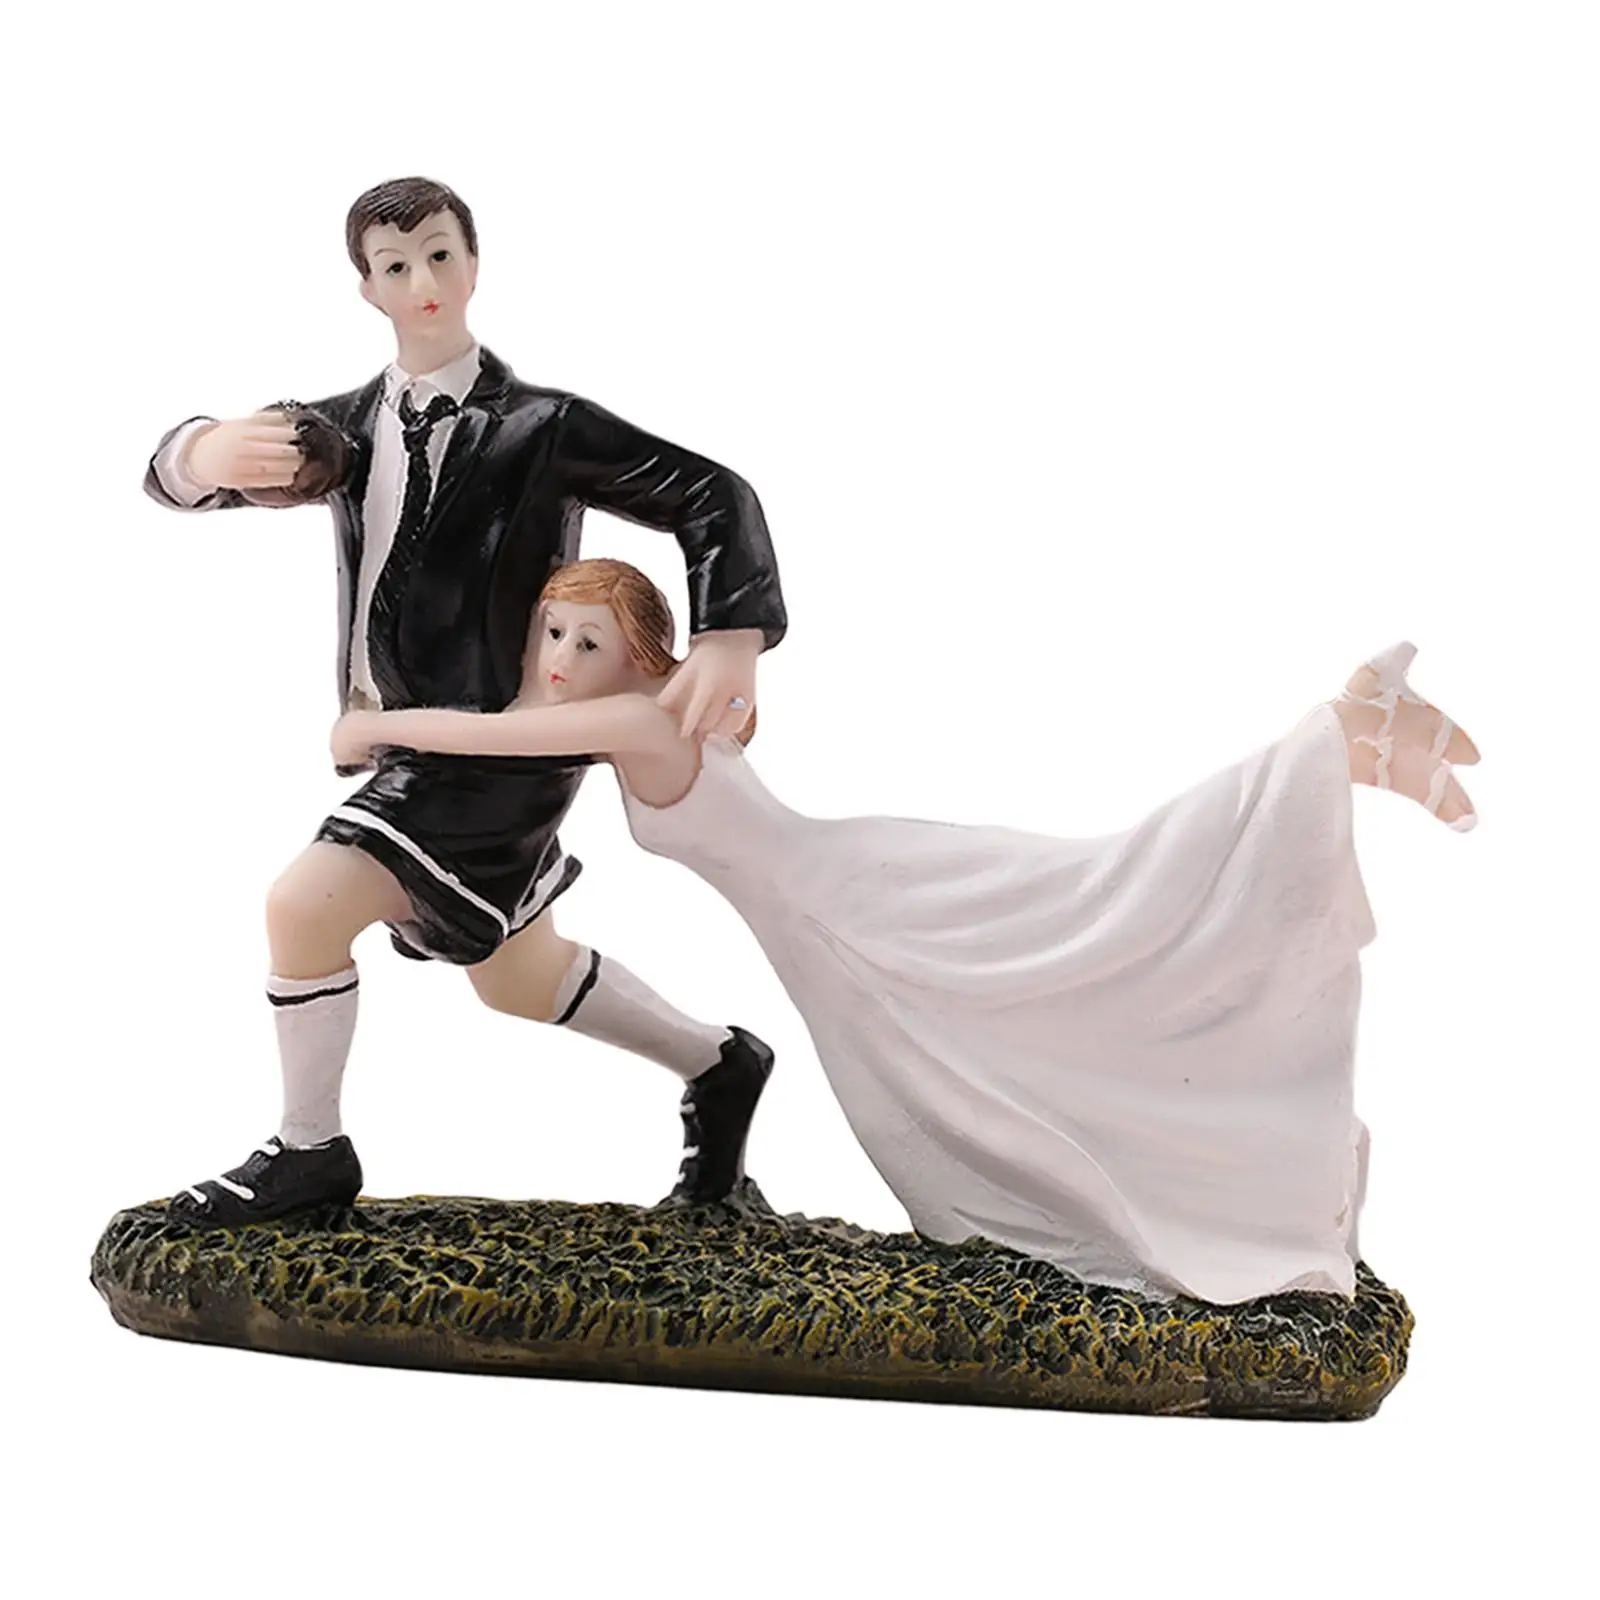 Wedding Cake Topper Bride and Groom Football Figurine for Tabletop Ceremony